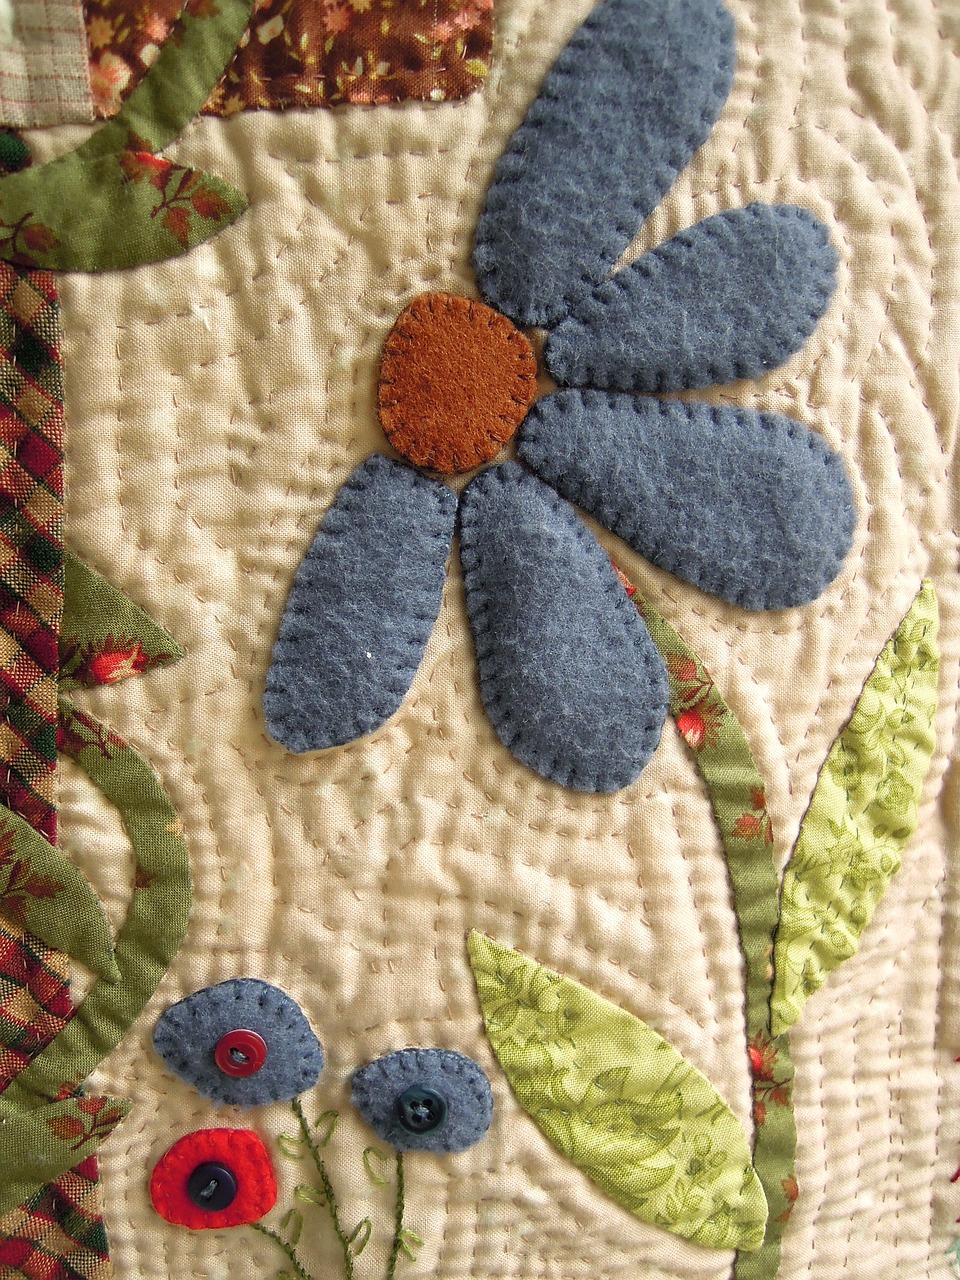 Stitched flower with embroidery